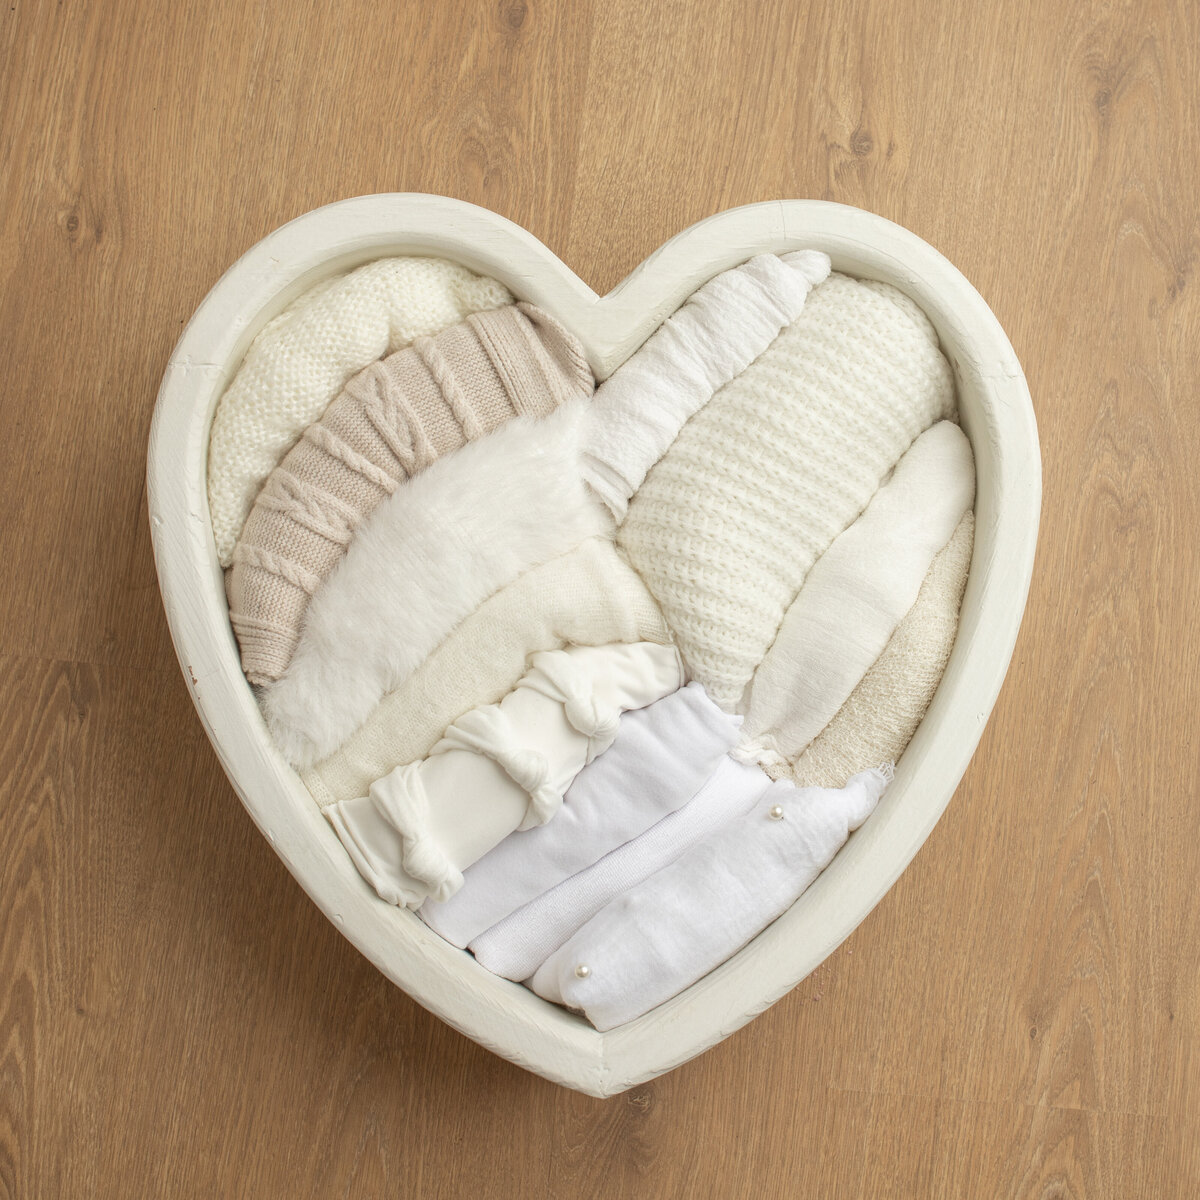 Image is of a heart-shaped newborn photography prop bowl.  The Heart Shaped Bowel contains a number of white and cream coloured wraps for newborn photography . Studio image by Lauren Vanier Photography